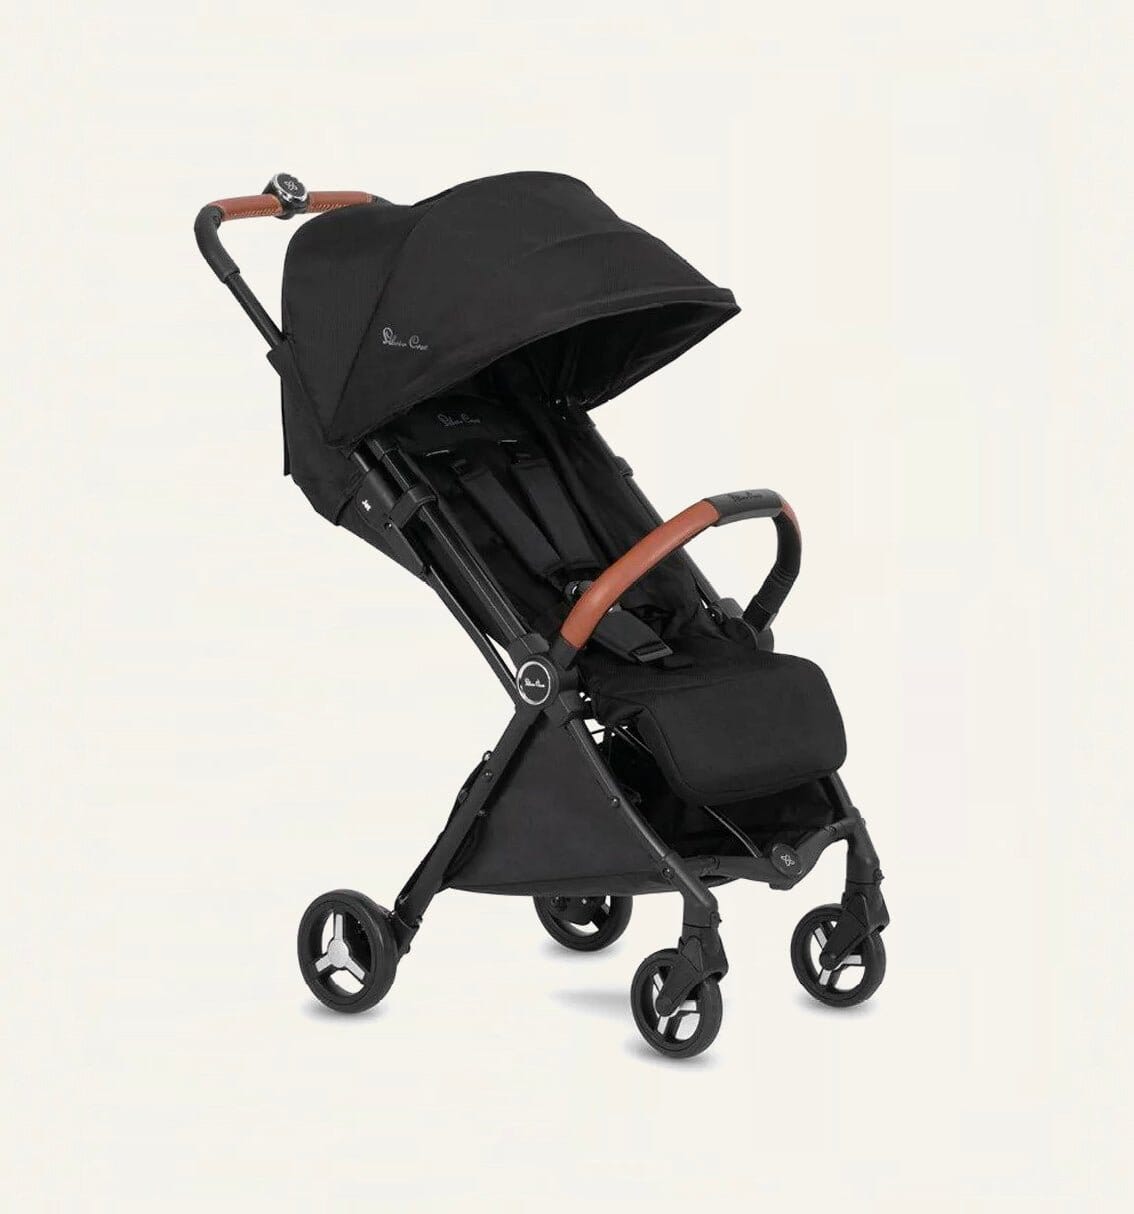 Silver Cross Jet Stroller to rent from £28 per month on Baboodle.